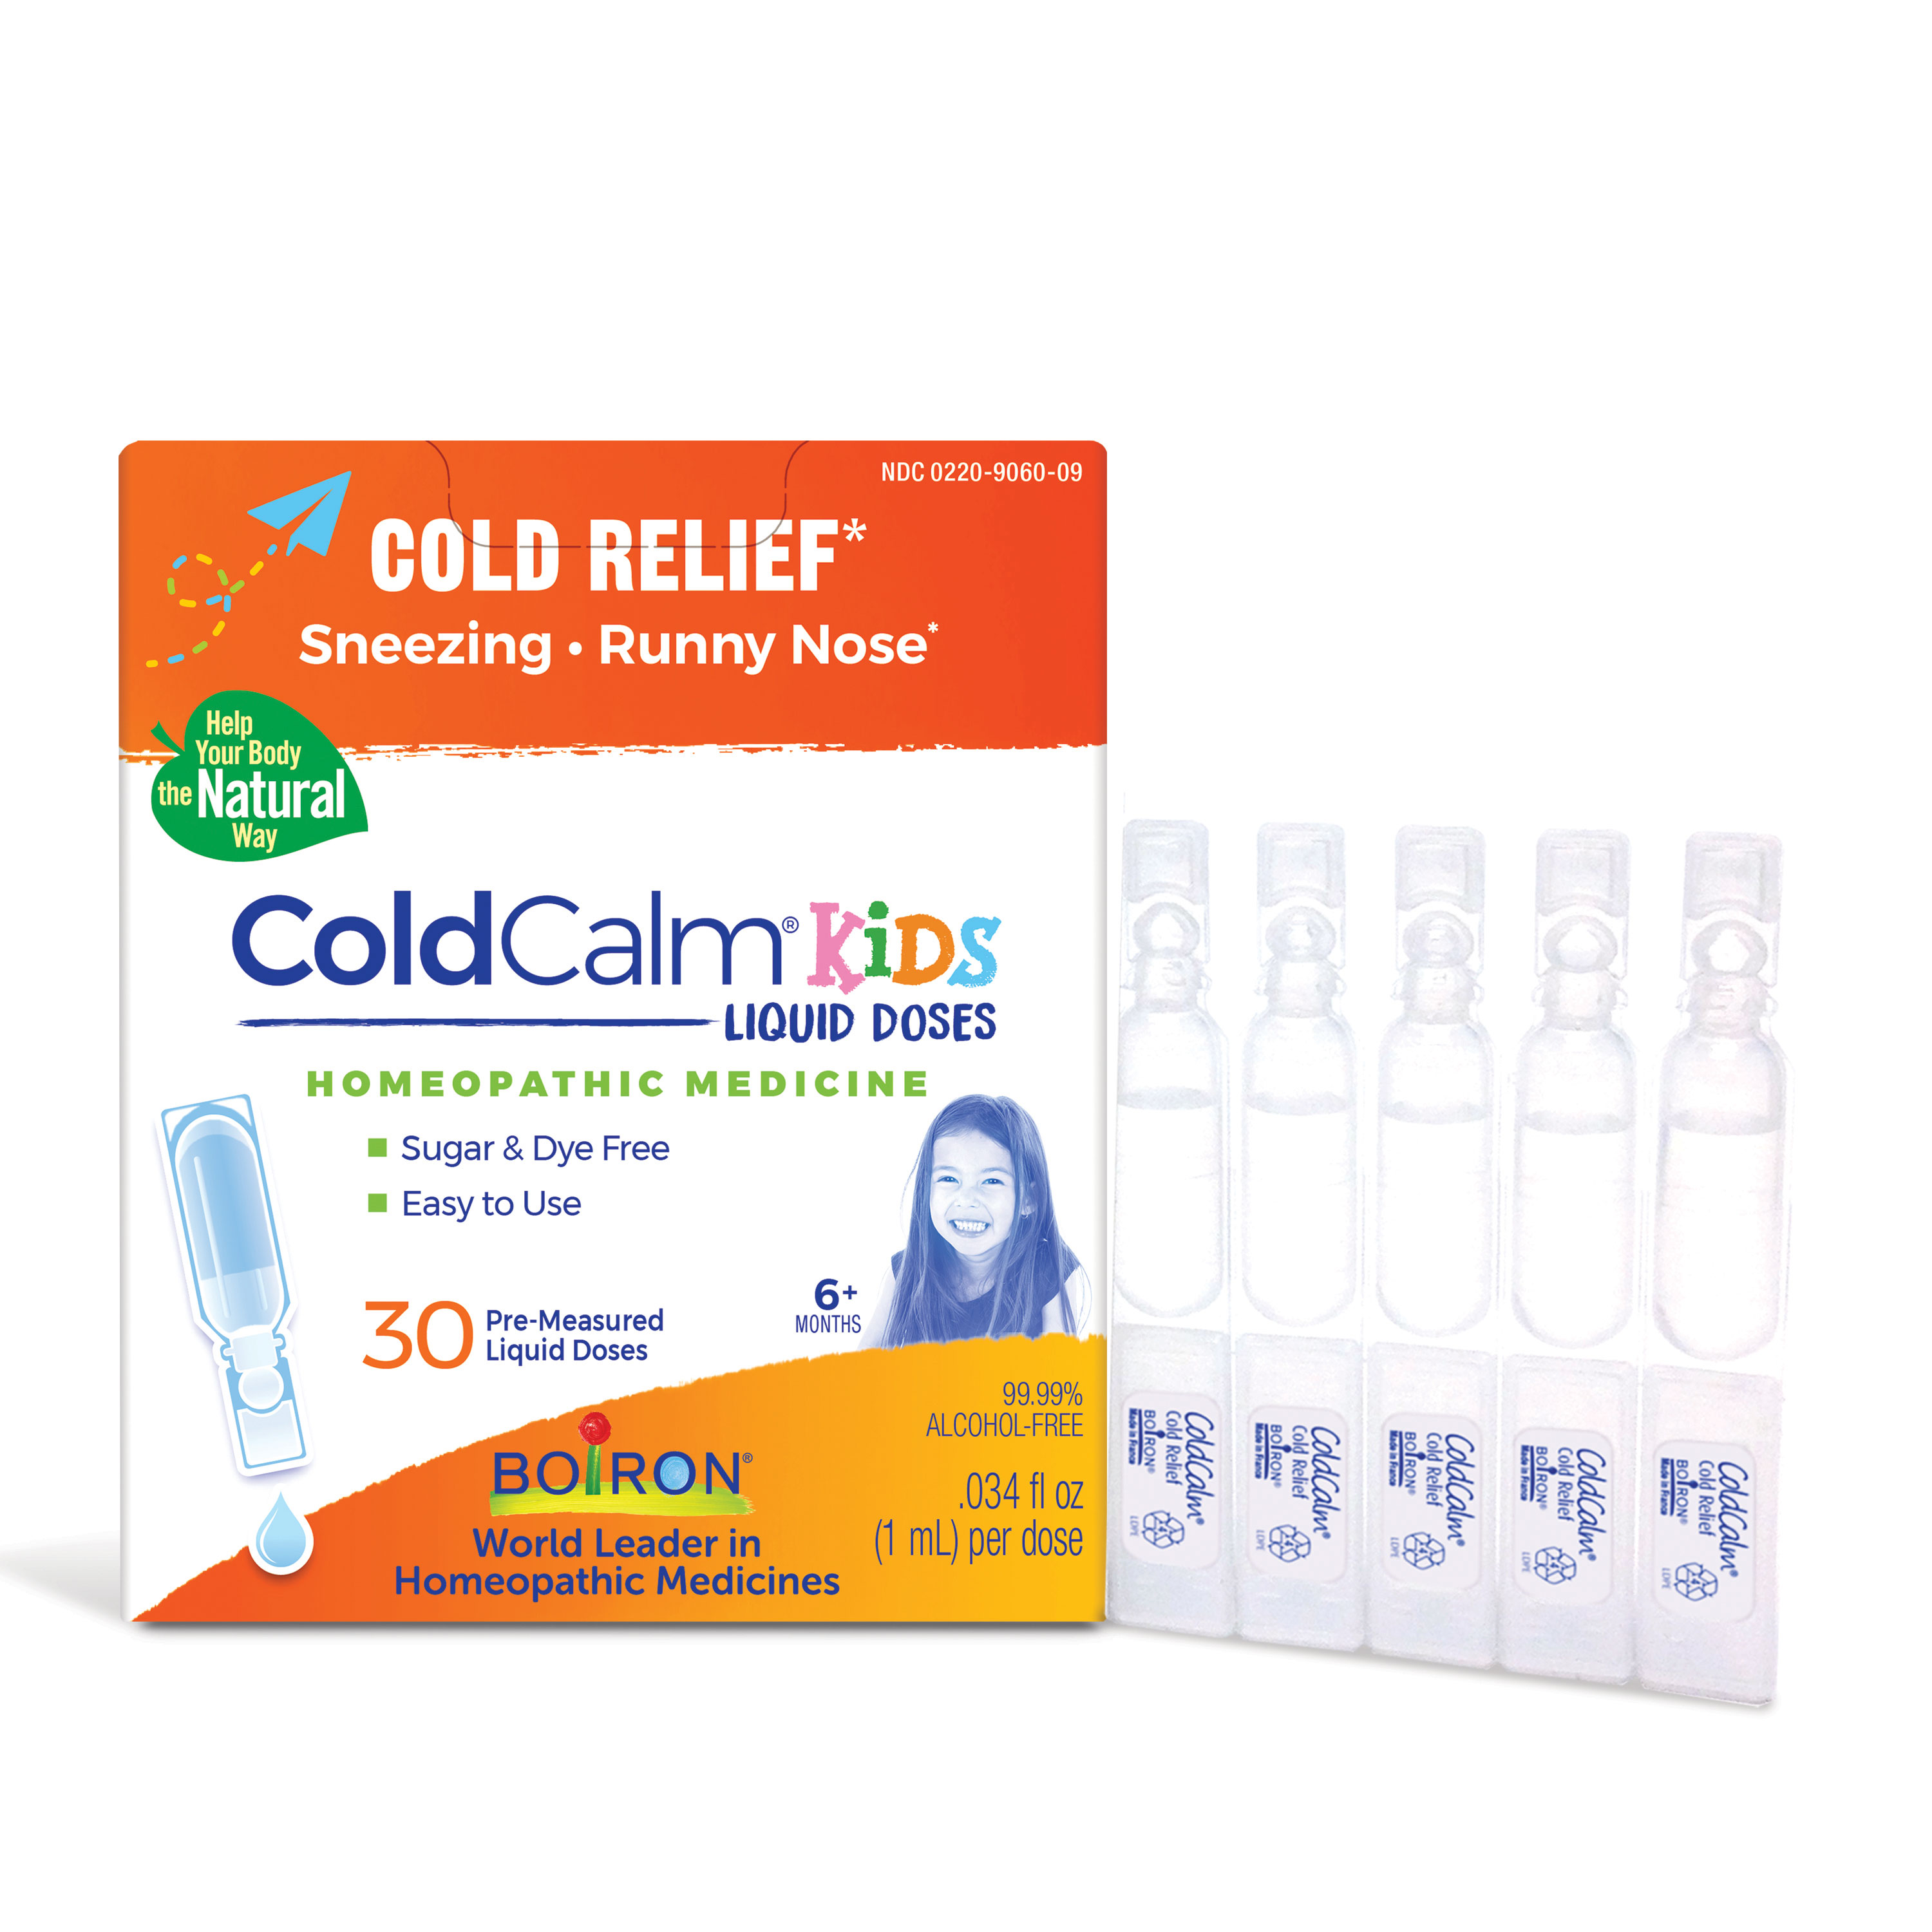 Image for ColdCalm Kids Liquid Doses